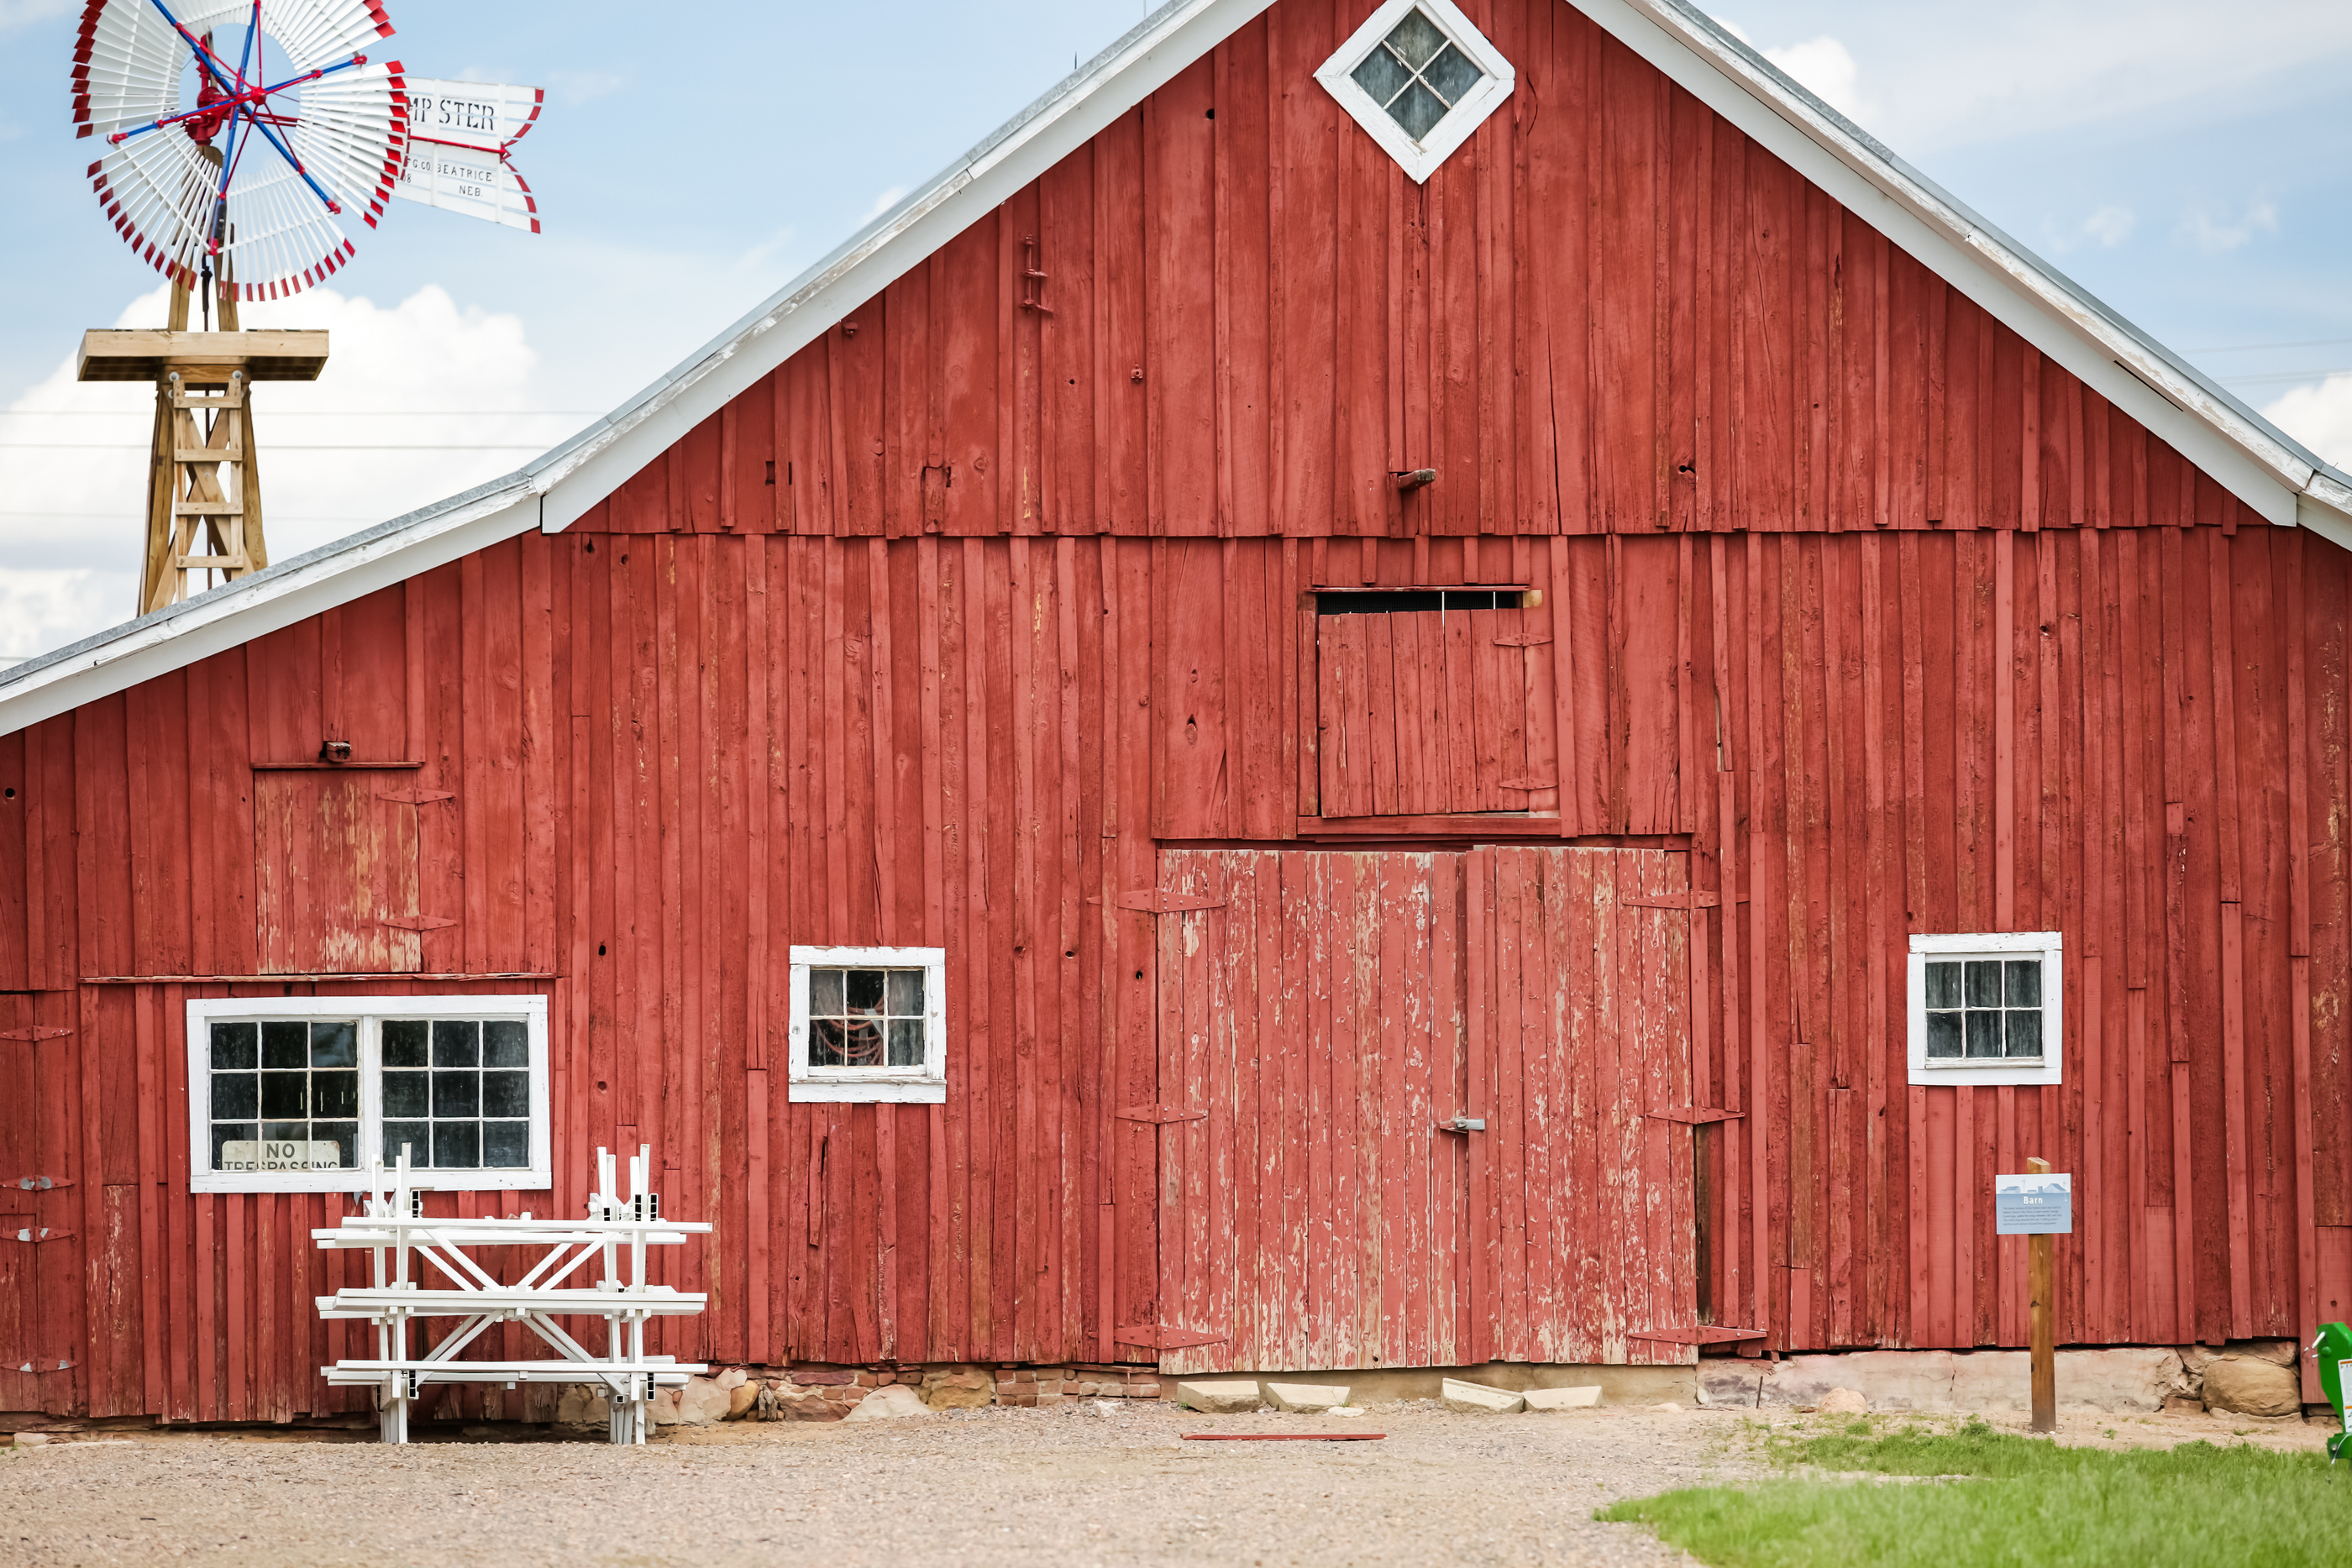 Why are Barns Traditionally Painted Red?